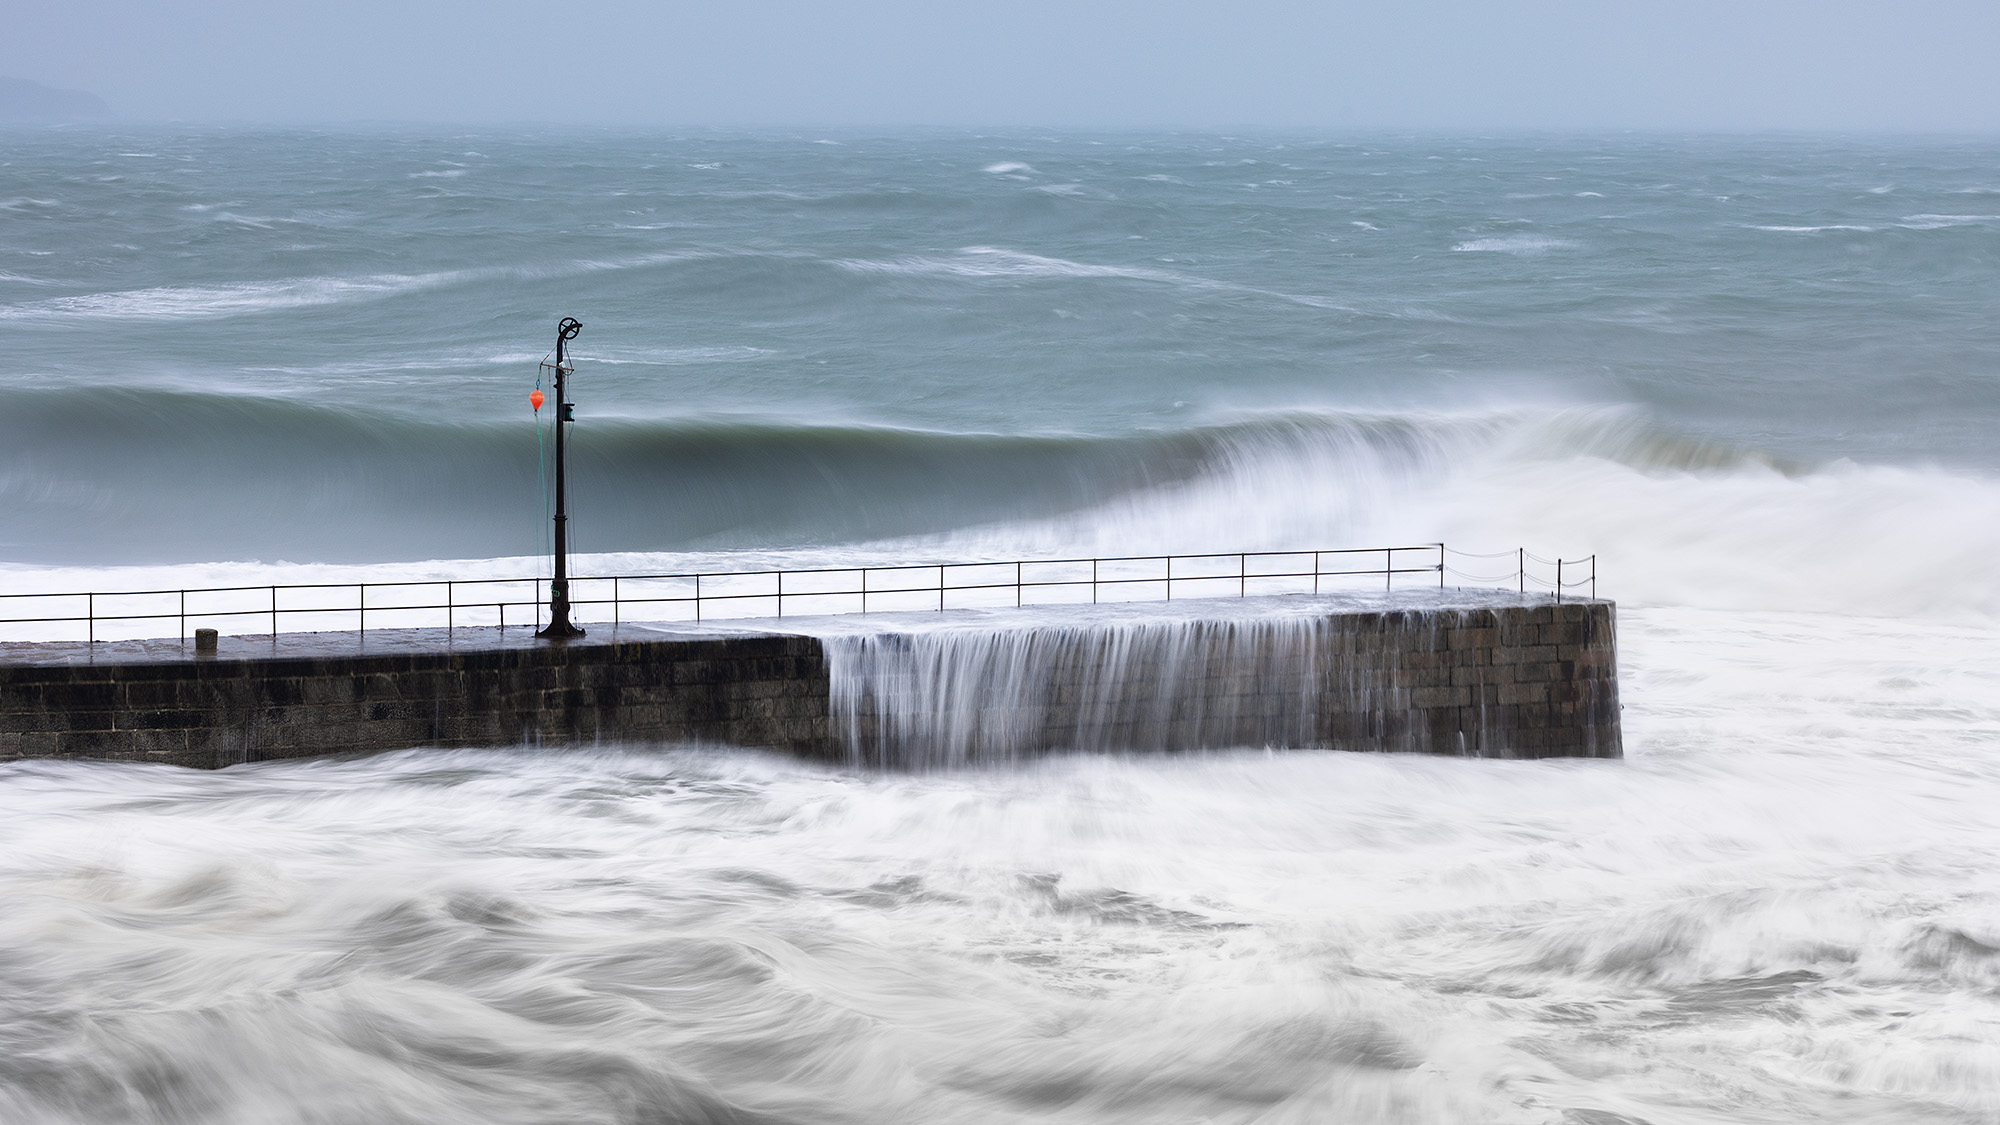 Trying to get creative by slowing down the shutter speed as the waves fall away from the pier.